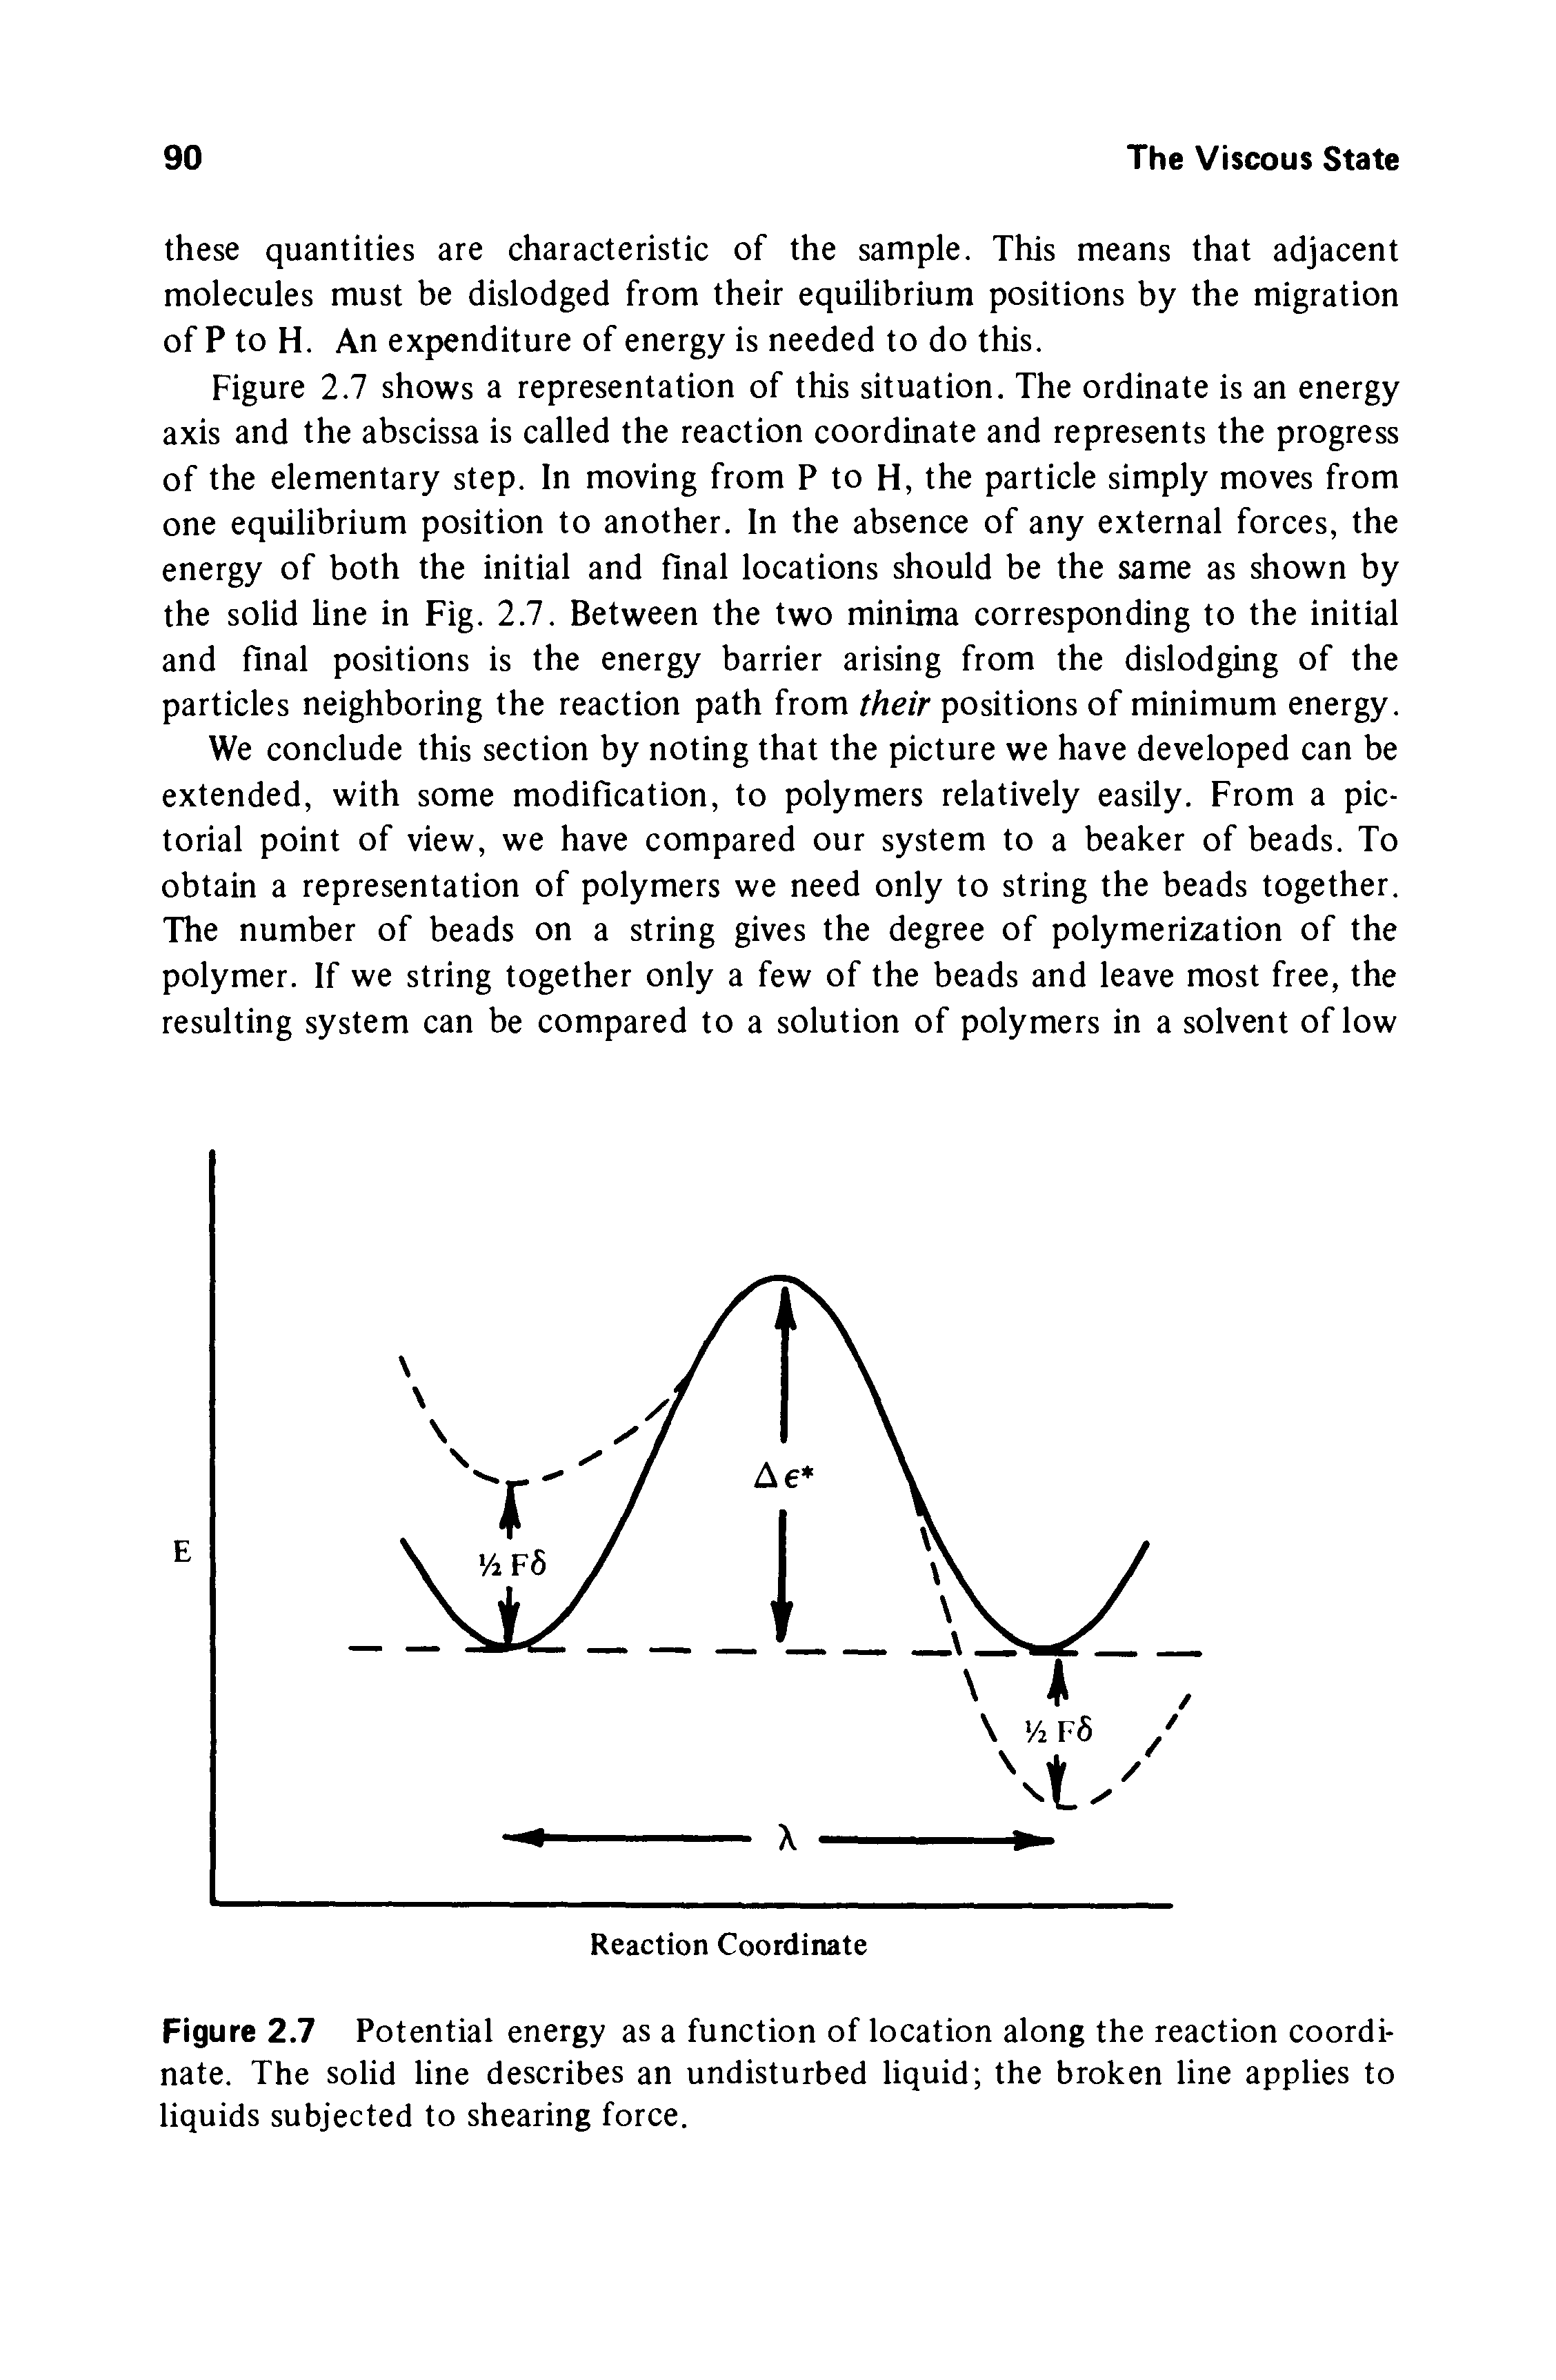 Figure 2.7 shows a representation of this situation. The ordinate is an energy axis and the abscissa is called the reaction coordinate and represents the progress of the elementary step. In moving from P to H, the particle simply moves from one equilibrium position to another. In the absence of any external forces, the energy of both the initial and final locations should be the same as shown by the solid line in Fig. 2.7. Between the two minima corresponding to the initial and final positions is the energy barrier arising from the dislodging of the particles neighboring the reaction path from their positions of minimum energy.